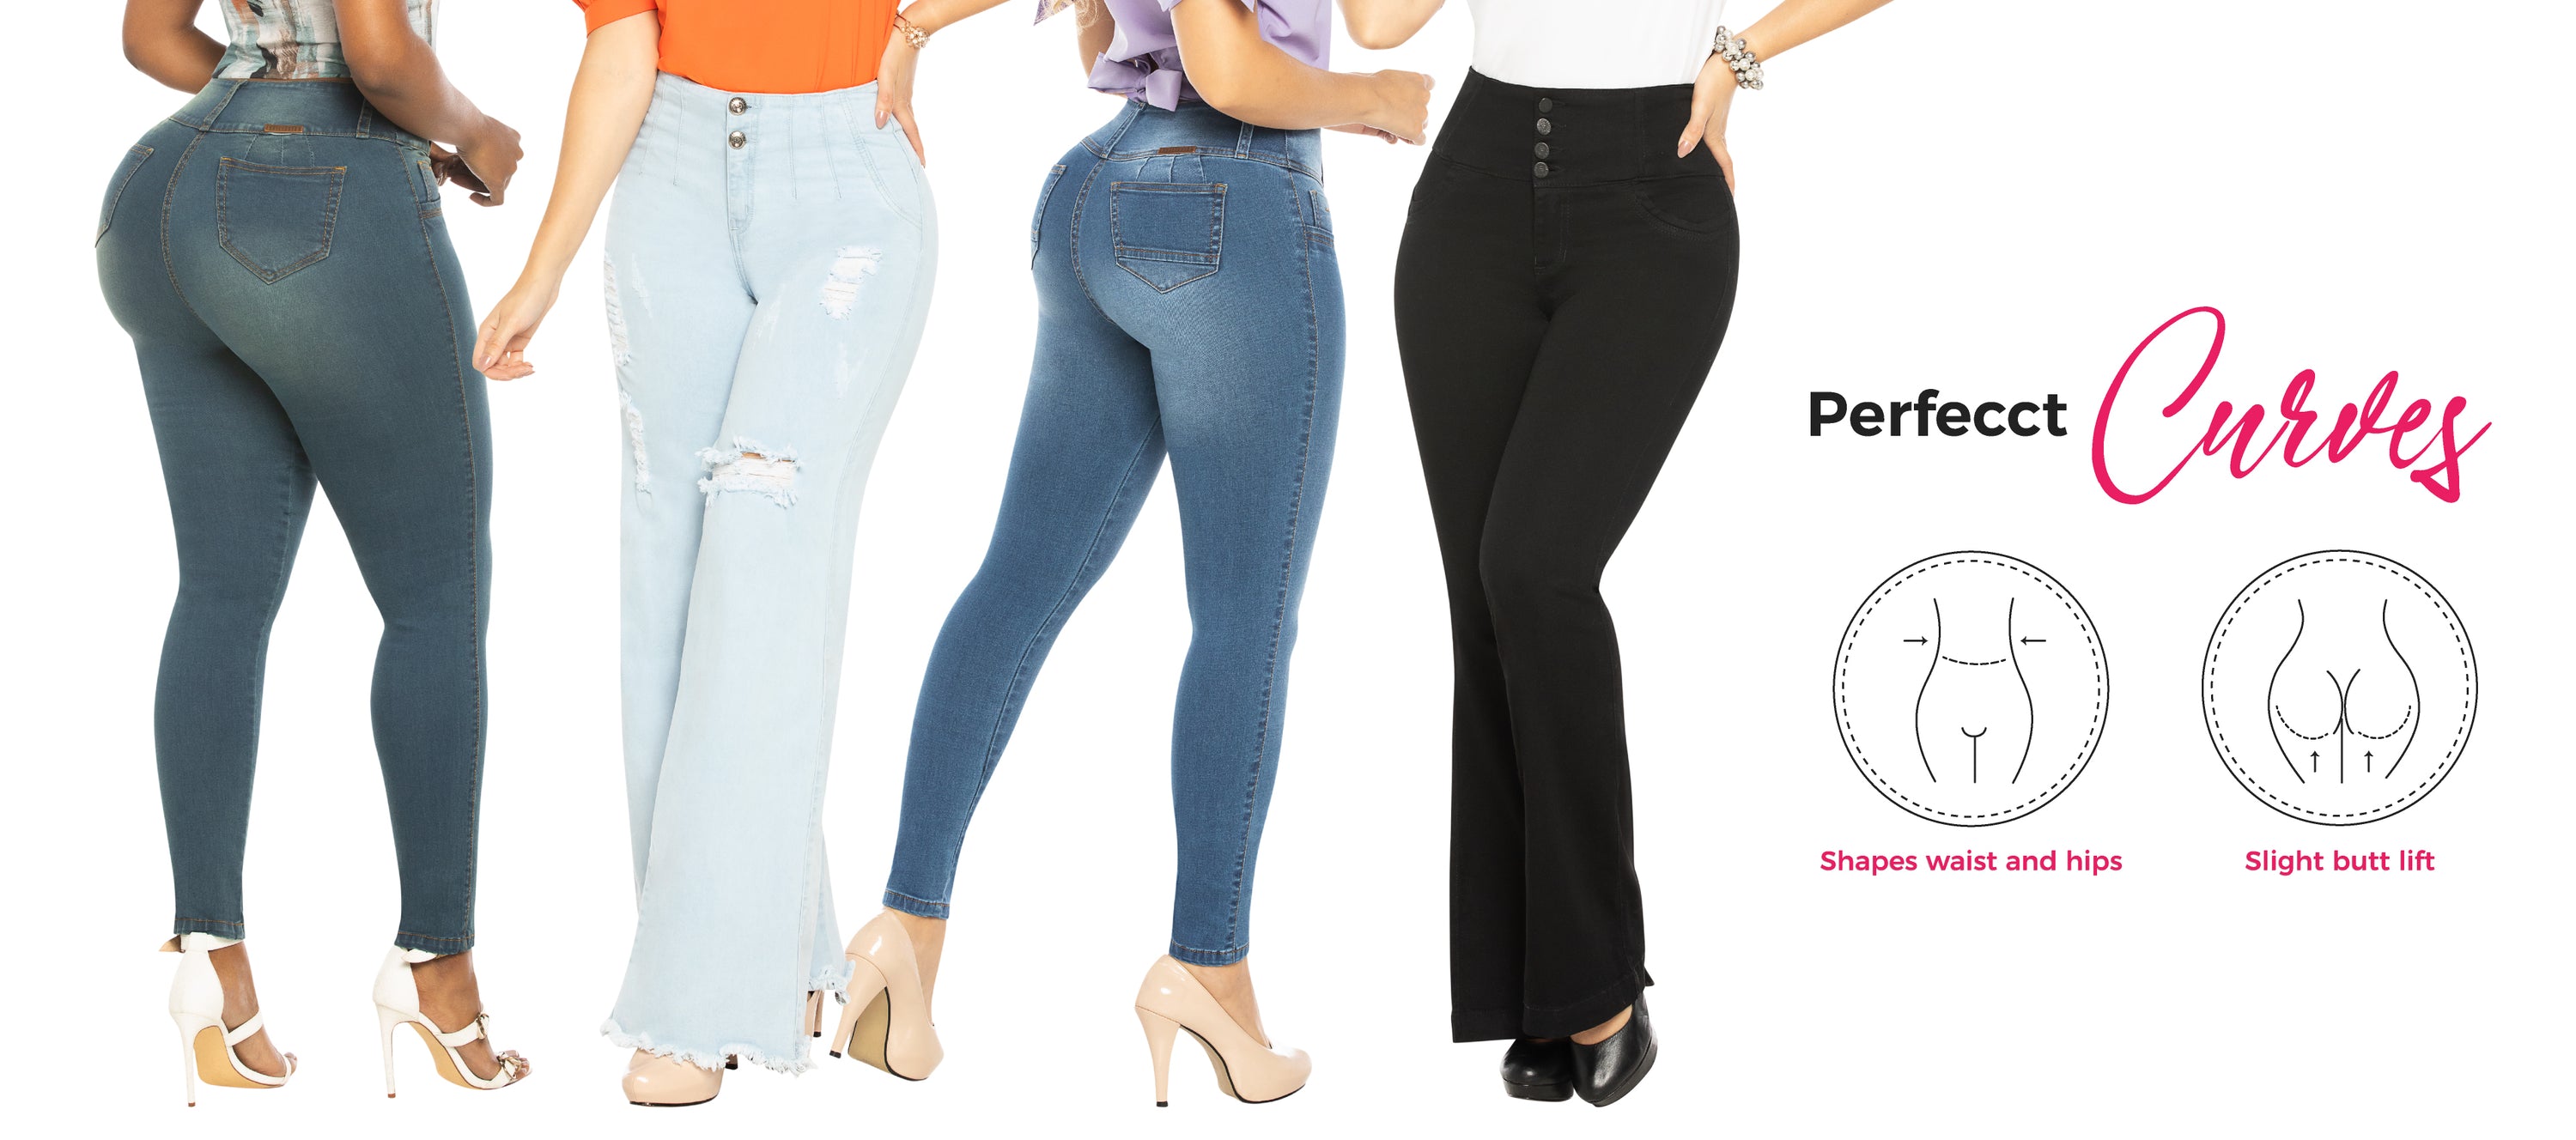 Fajas y Jeans Equilibrium - 🥳 Get ready to enjoy all those